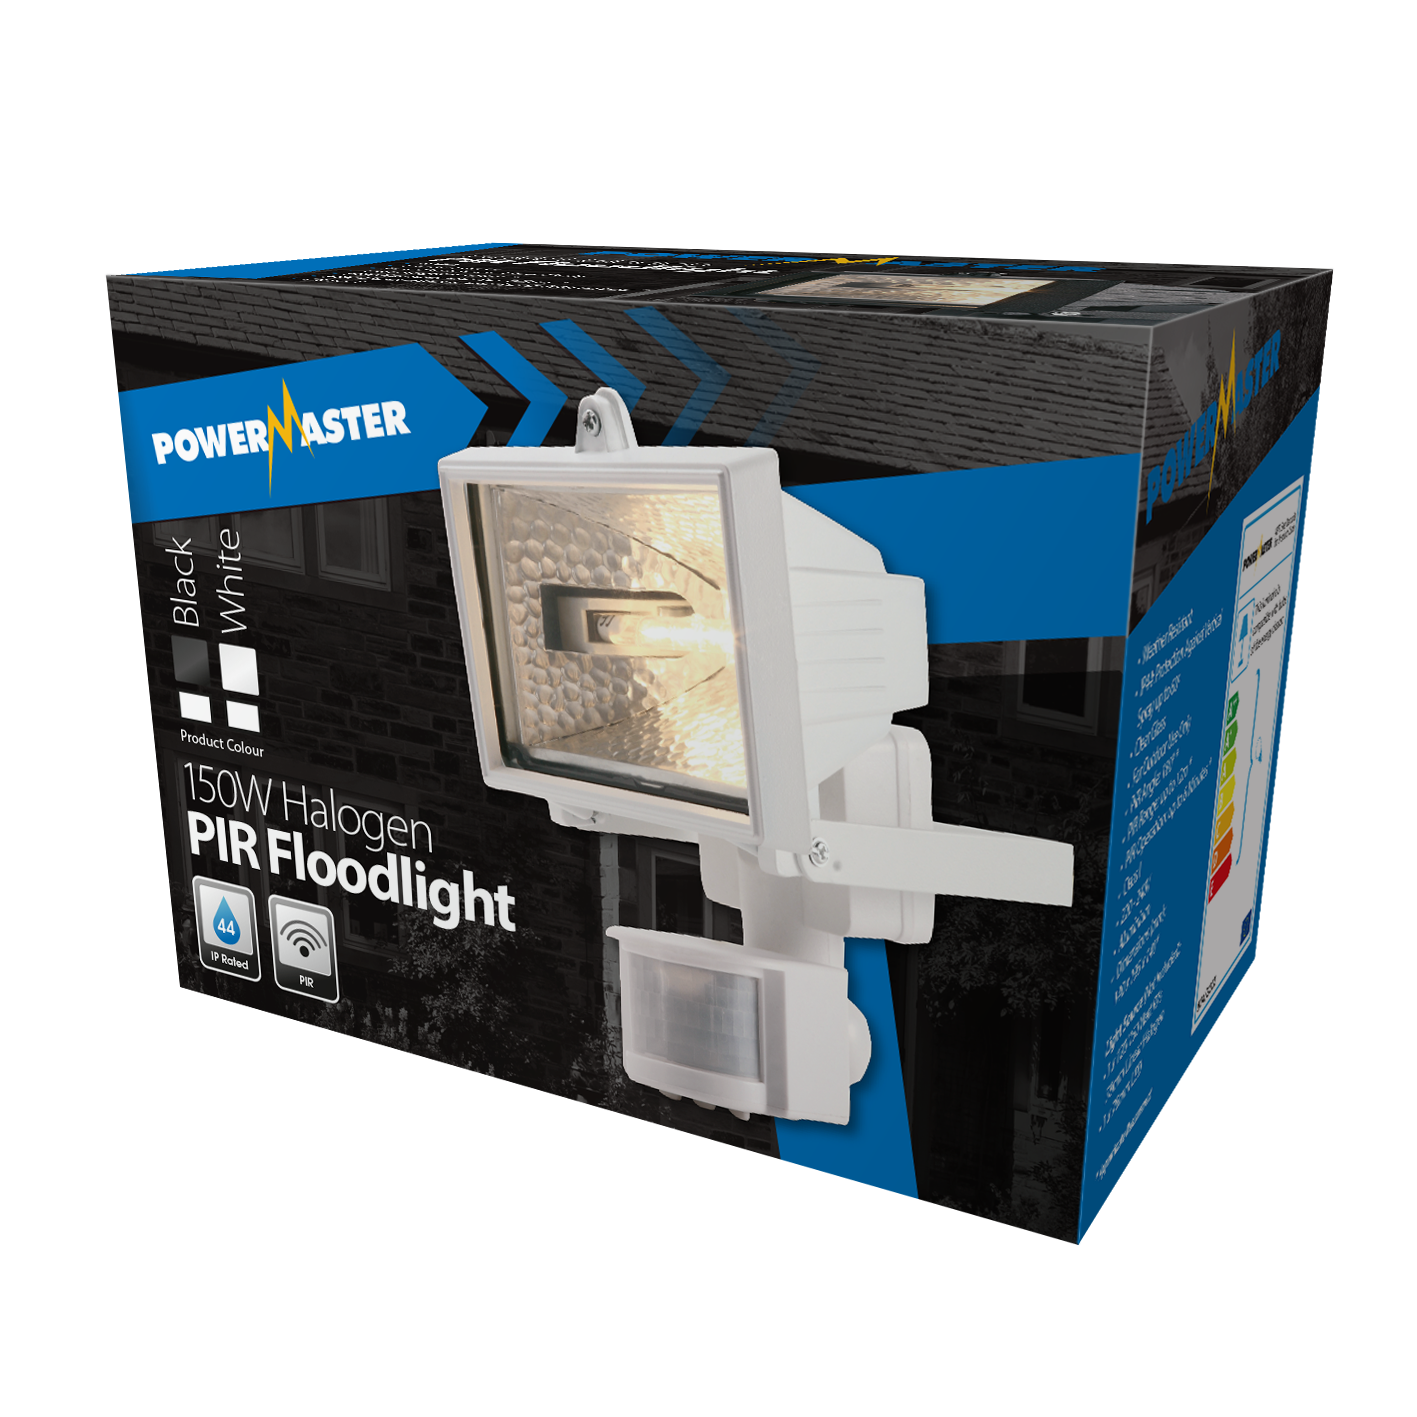 PowerMaster 120W Eco Halogen PIR Floodlight - White - Lamp Not Included